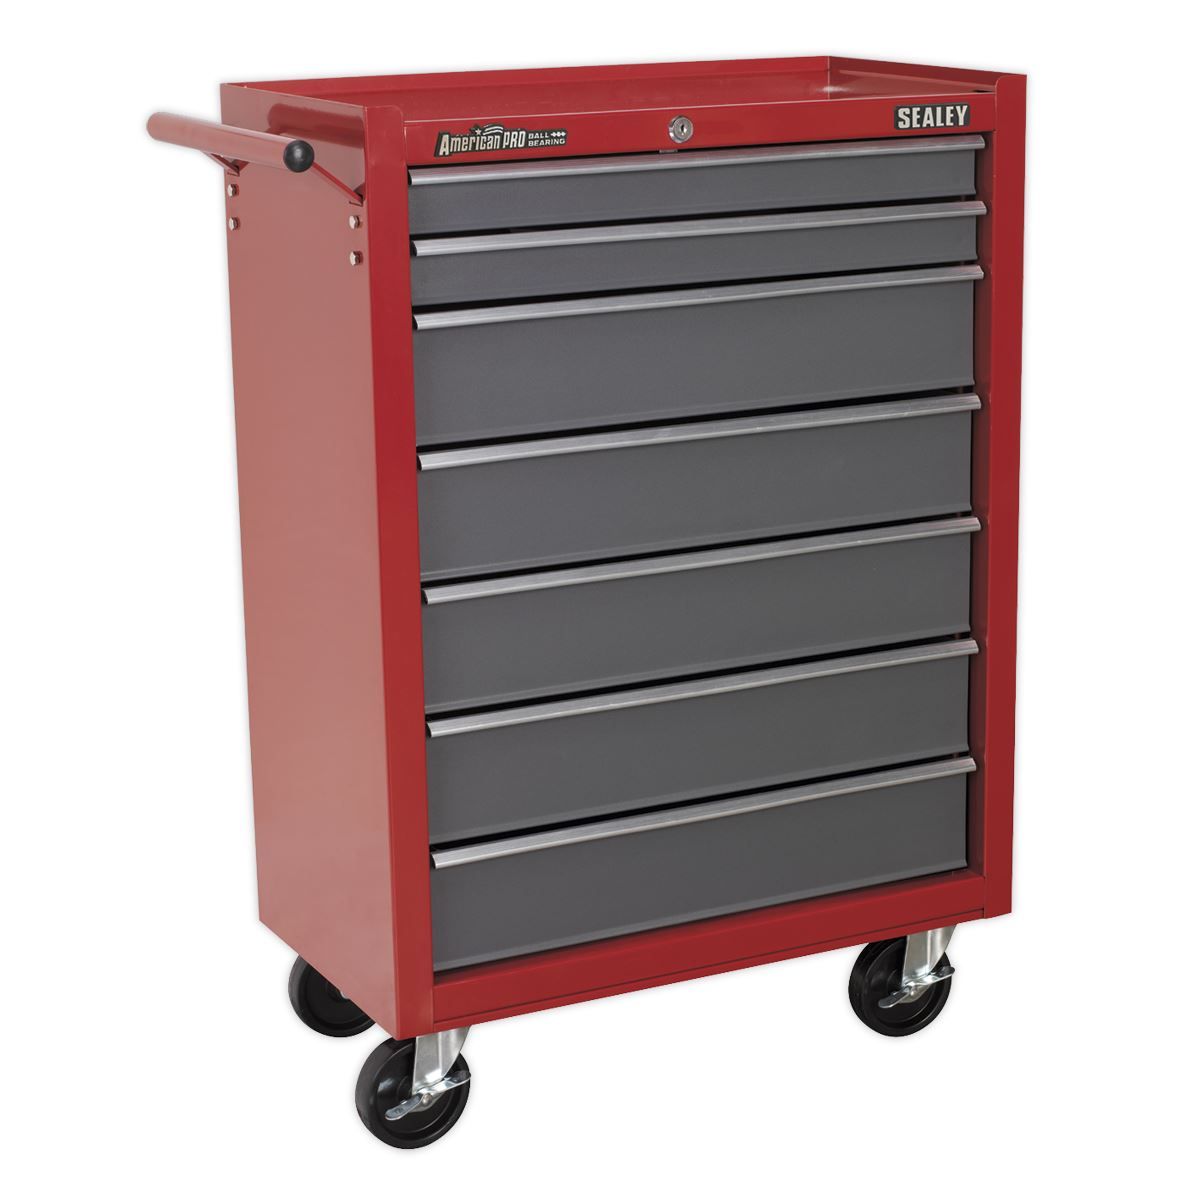 Sealey American Pro Rollcab 7 Drawer with Ball-Bearing Slides - Red/Grey